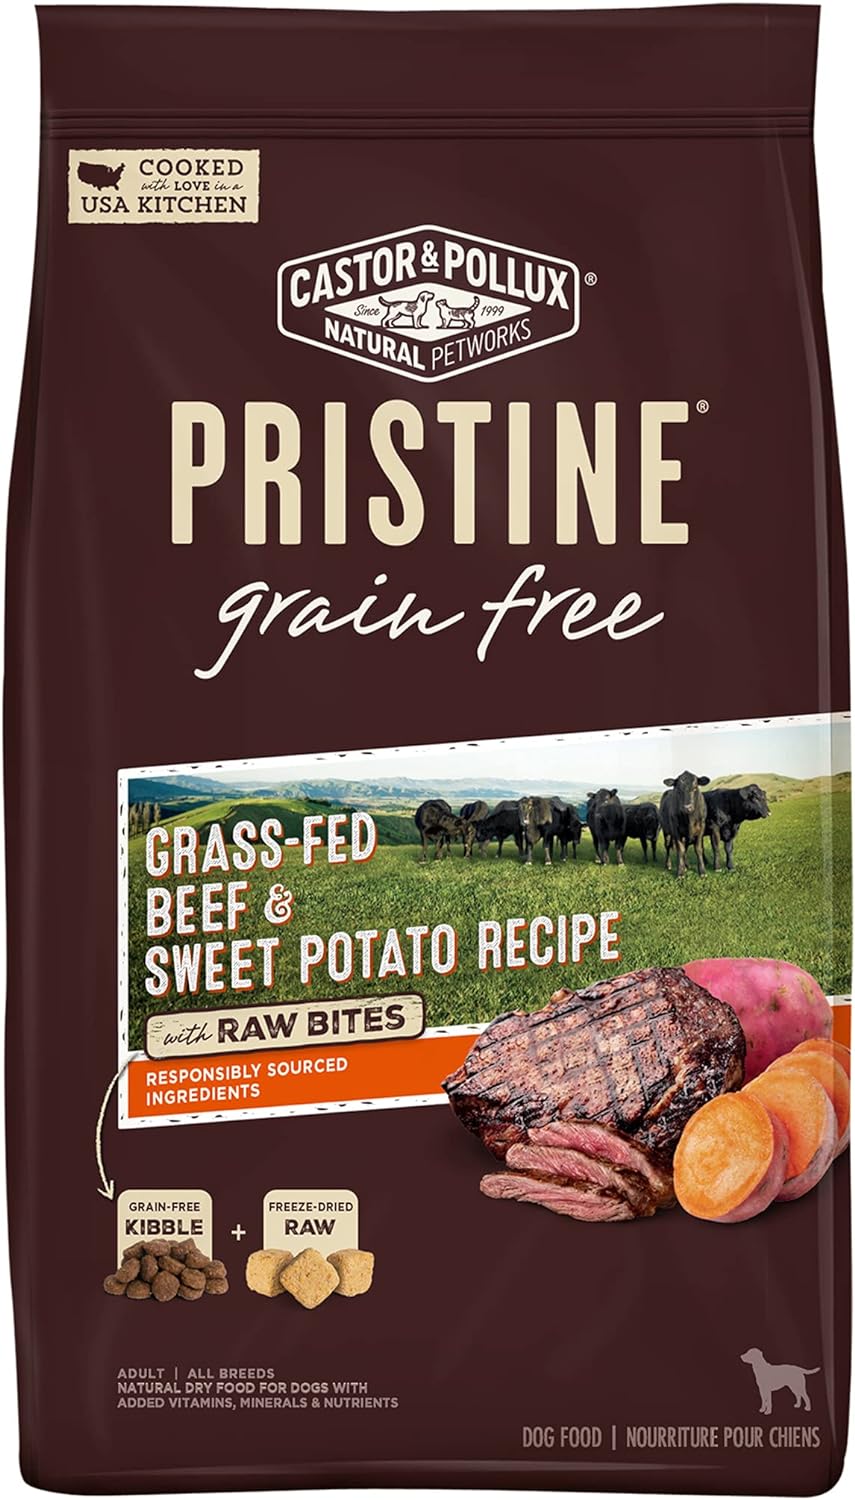 Castor & Pollux Pristine Grain-Free Grass-Fed Beef & Sweet Potato Recipe with Raw Bites Dry Dog Food – Gallery Image 1